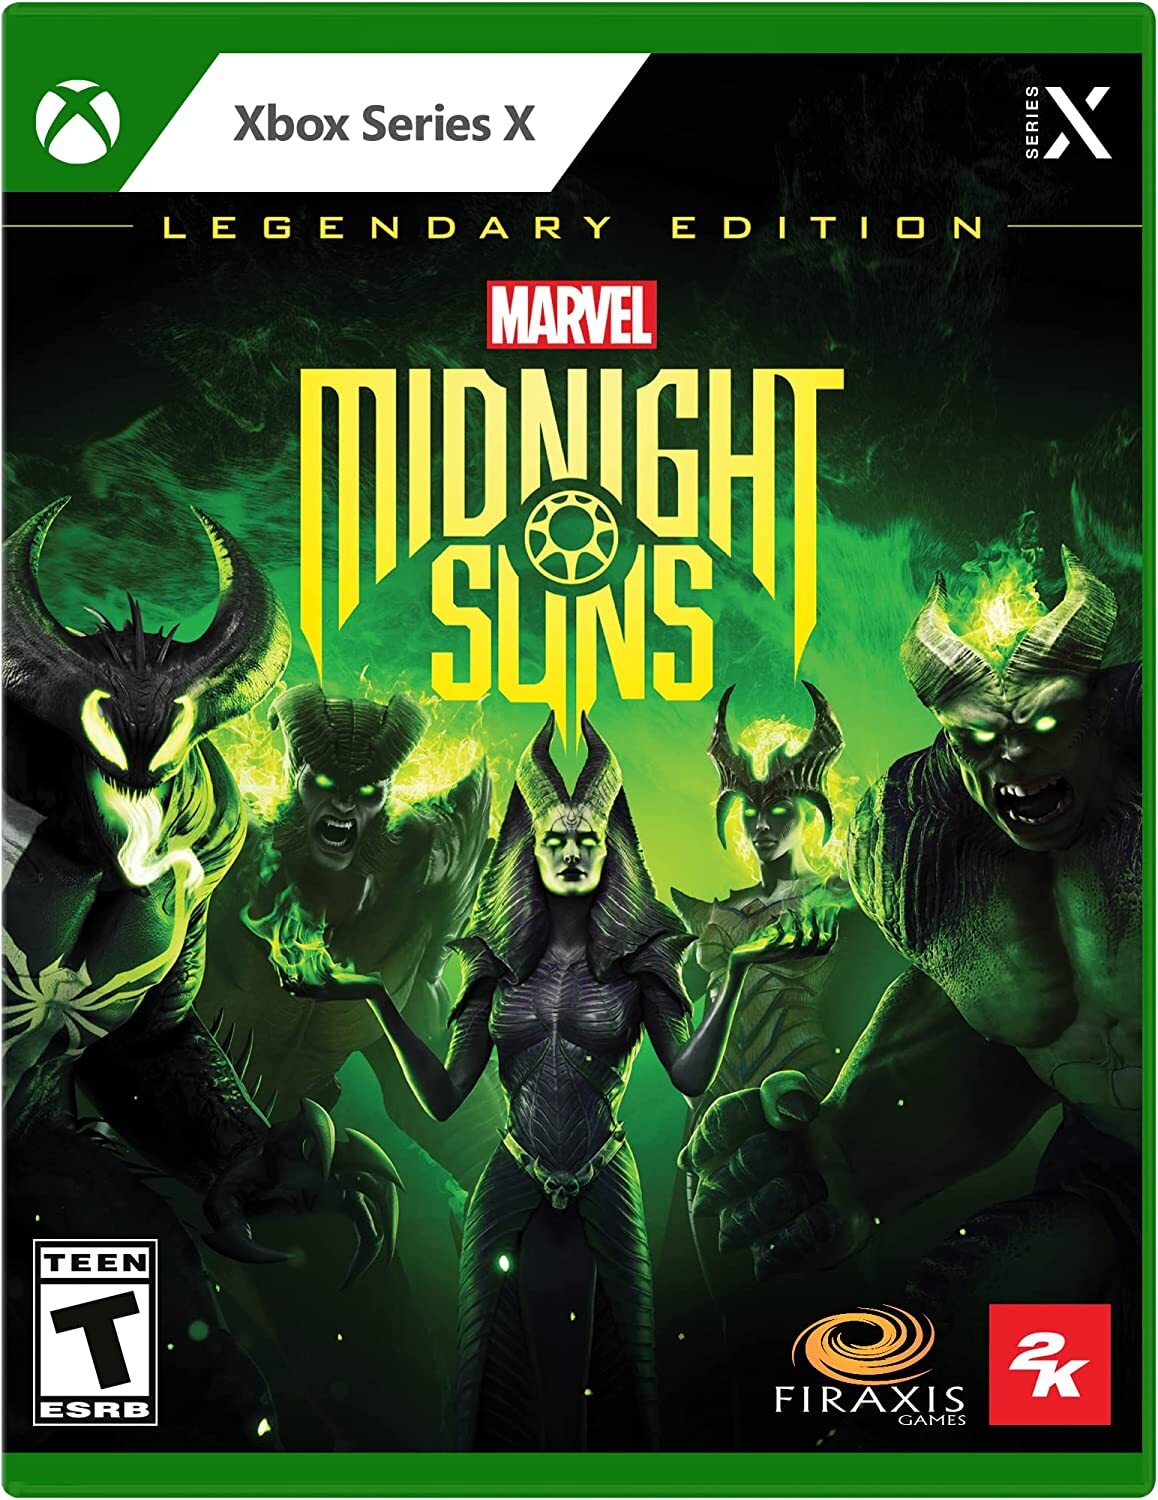 4] LET'S PLAY TOGETHER, MARVEL'S MIDNIGHT SUNS